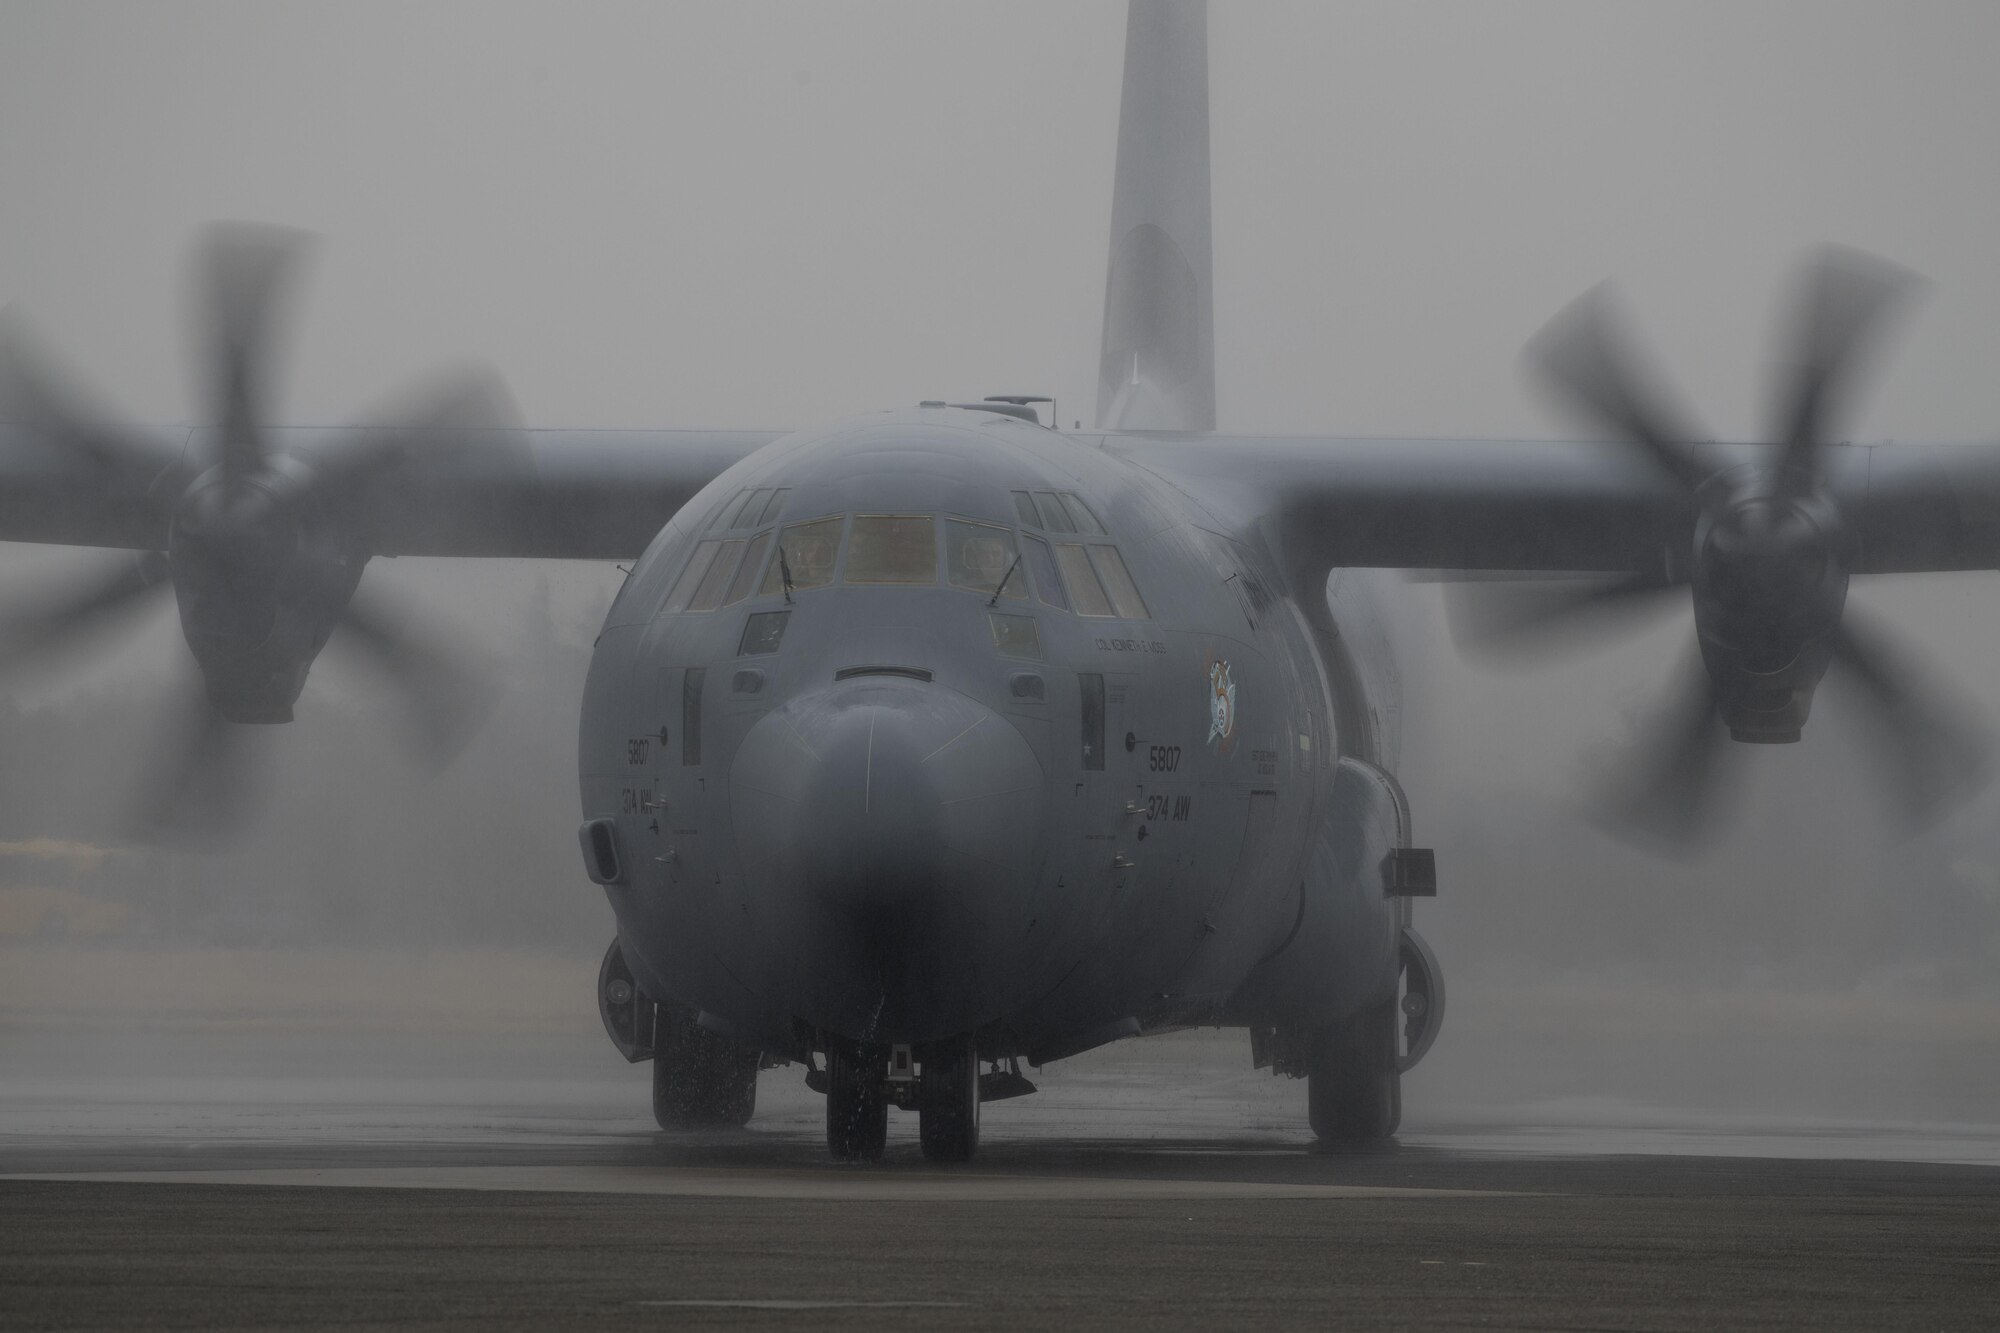 A C-130J Super Hercules with the 36th Airlift Squadron is drenched in water during a water salute upon arrival at Yokota Air Base, Japan, March 6, 2016. Much like its H-model older brother, the C-130J will be used to support critical peacekeeping and contingency operations in the Indo-Asia Pacific region, including cargo delivery, troop transport, airdrop and aeromedical missions. (U.S. Air Force photo by Staff Sgt. David Owsianka)